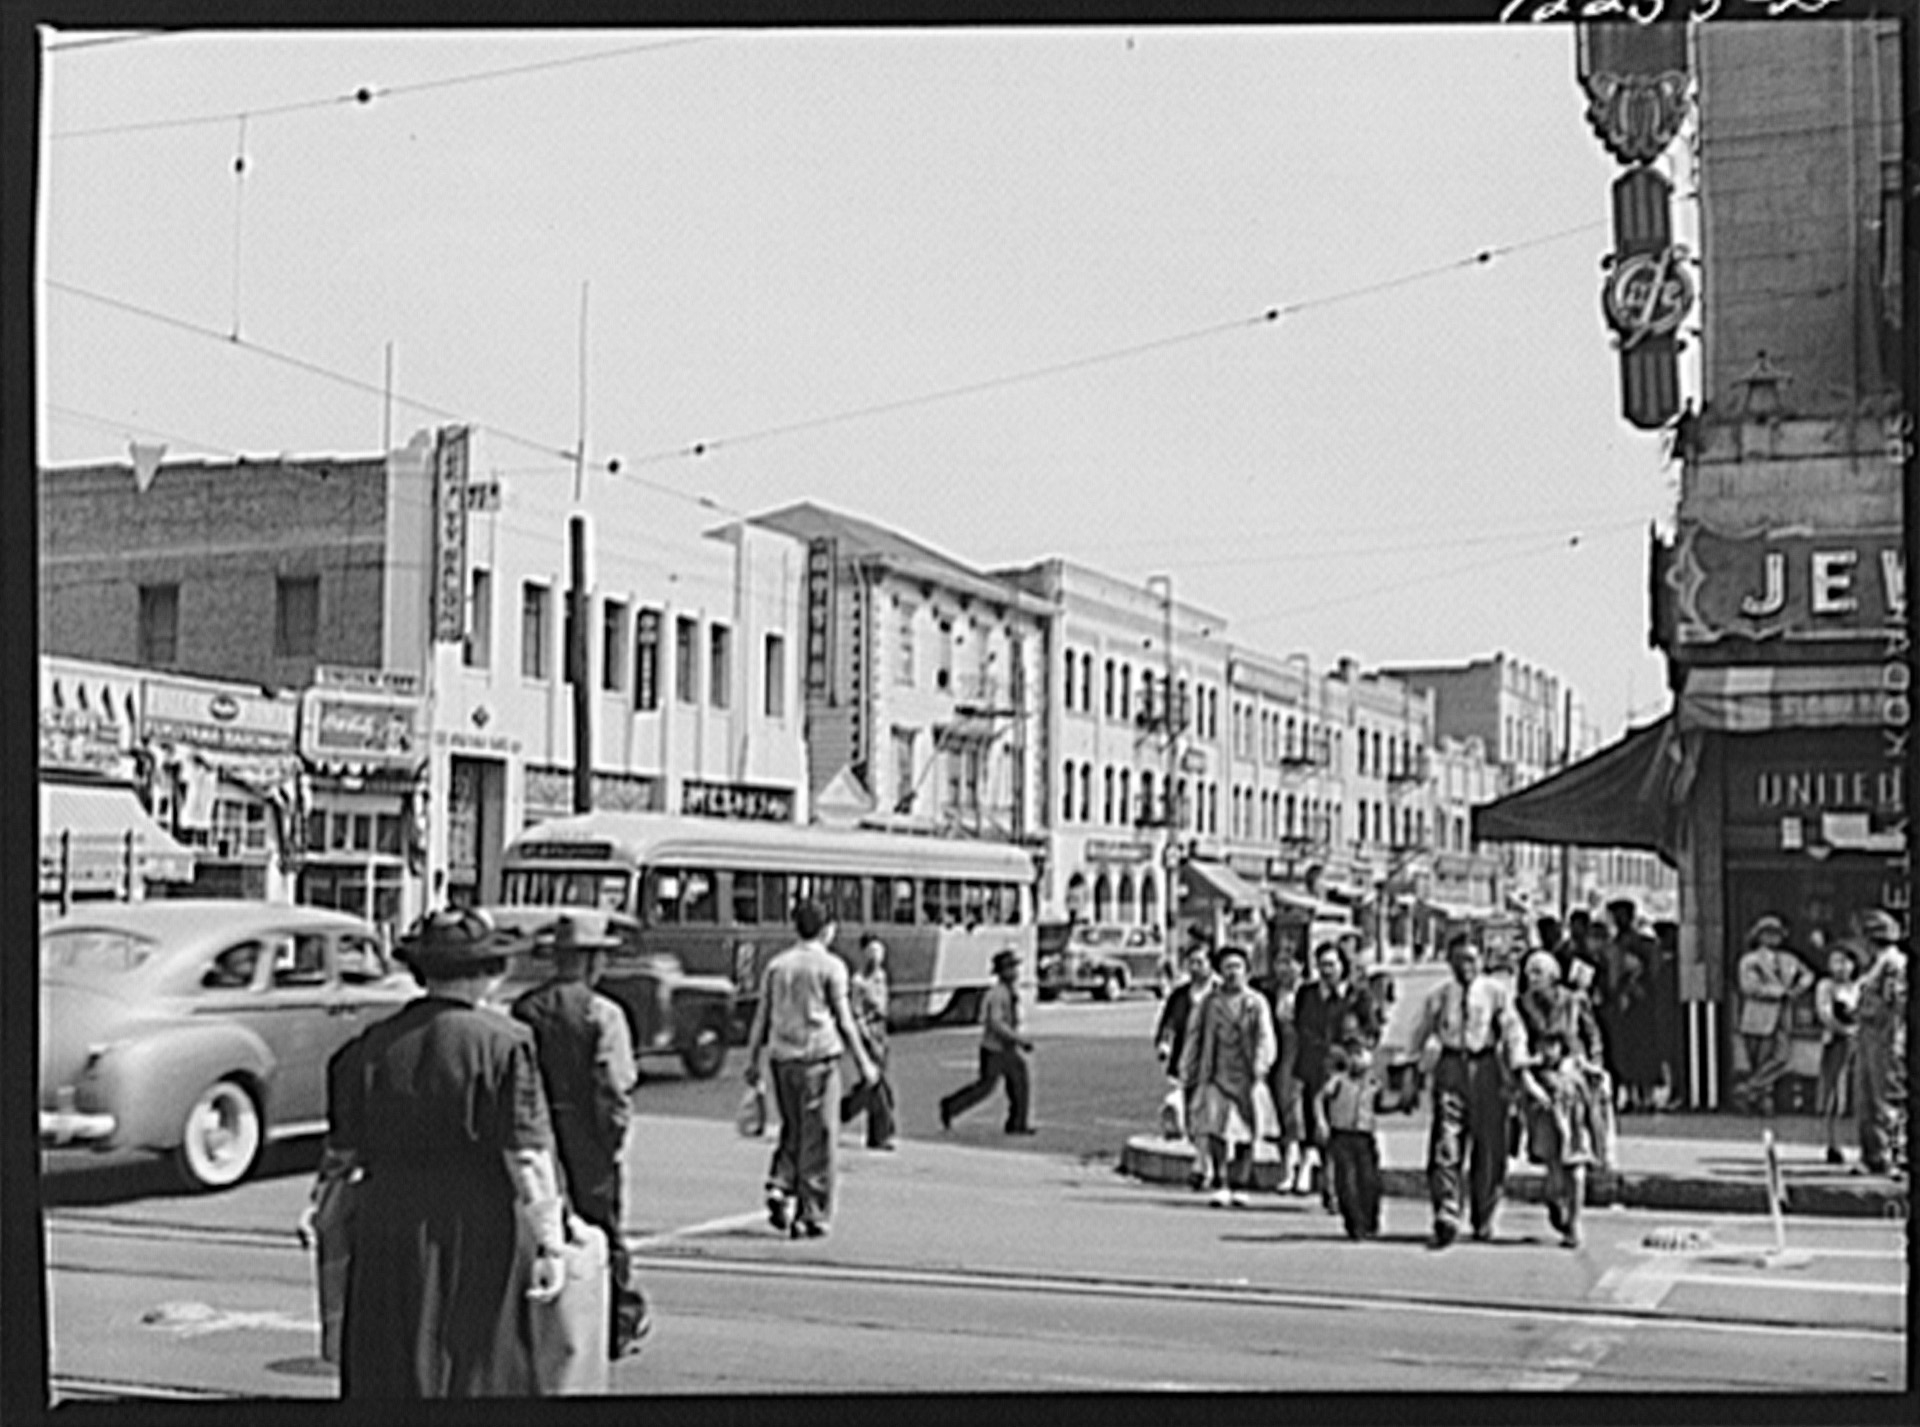 View of a street in Little Tokyo in Los Angeles, California in 1942.